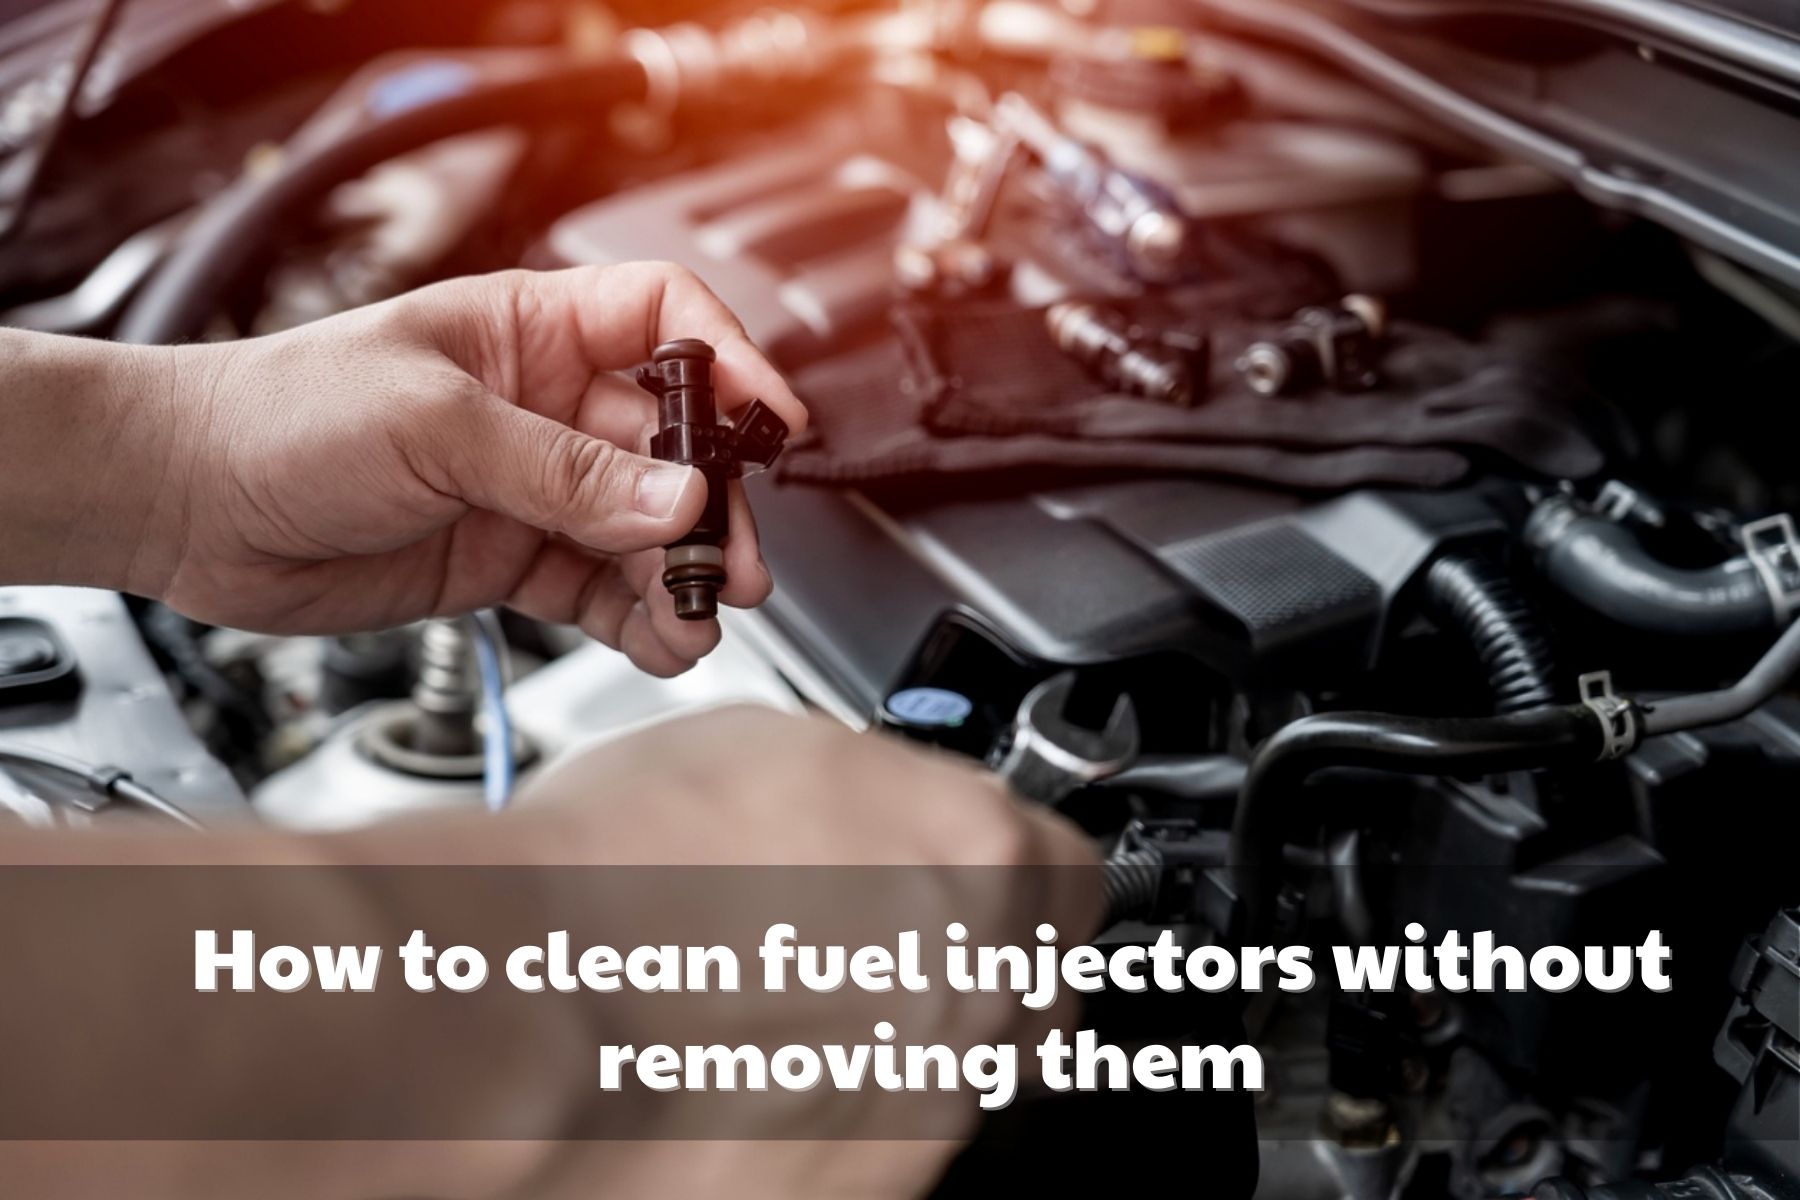 How to clean fuel injectors without removing them